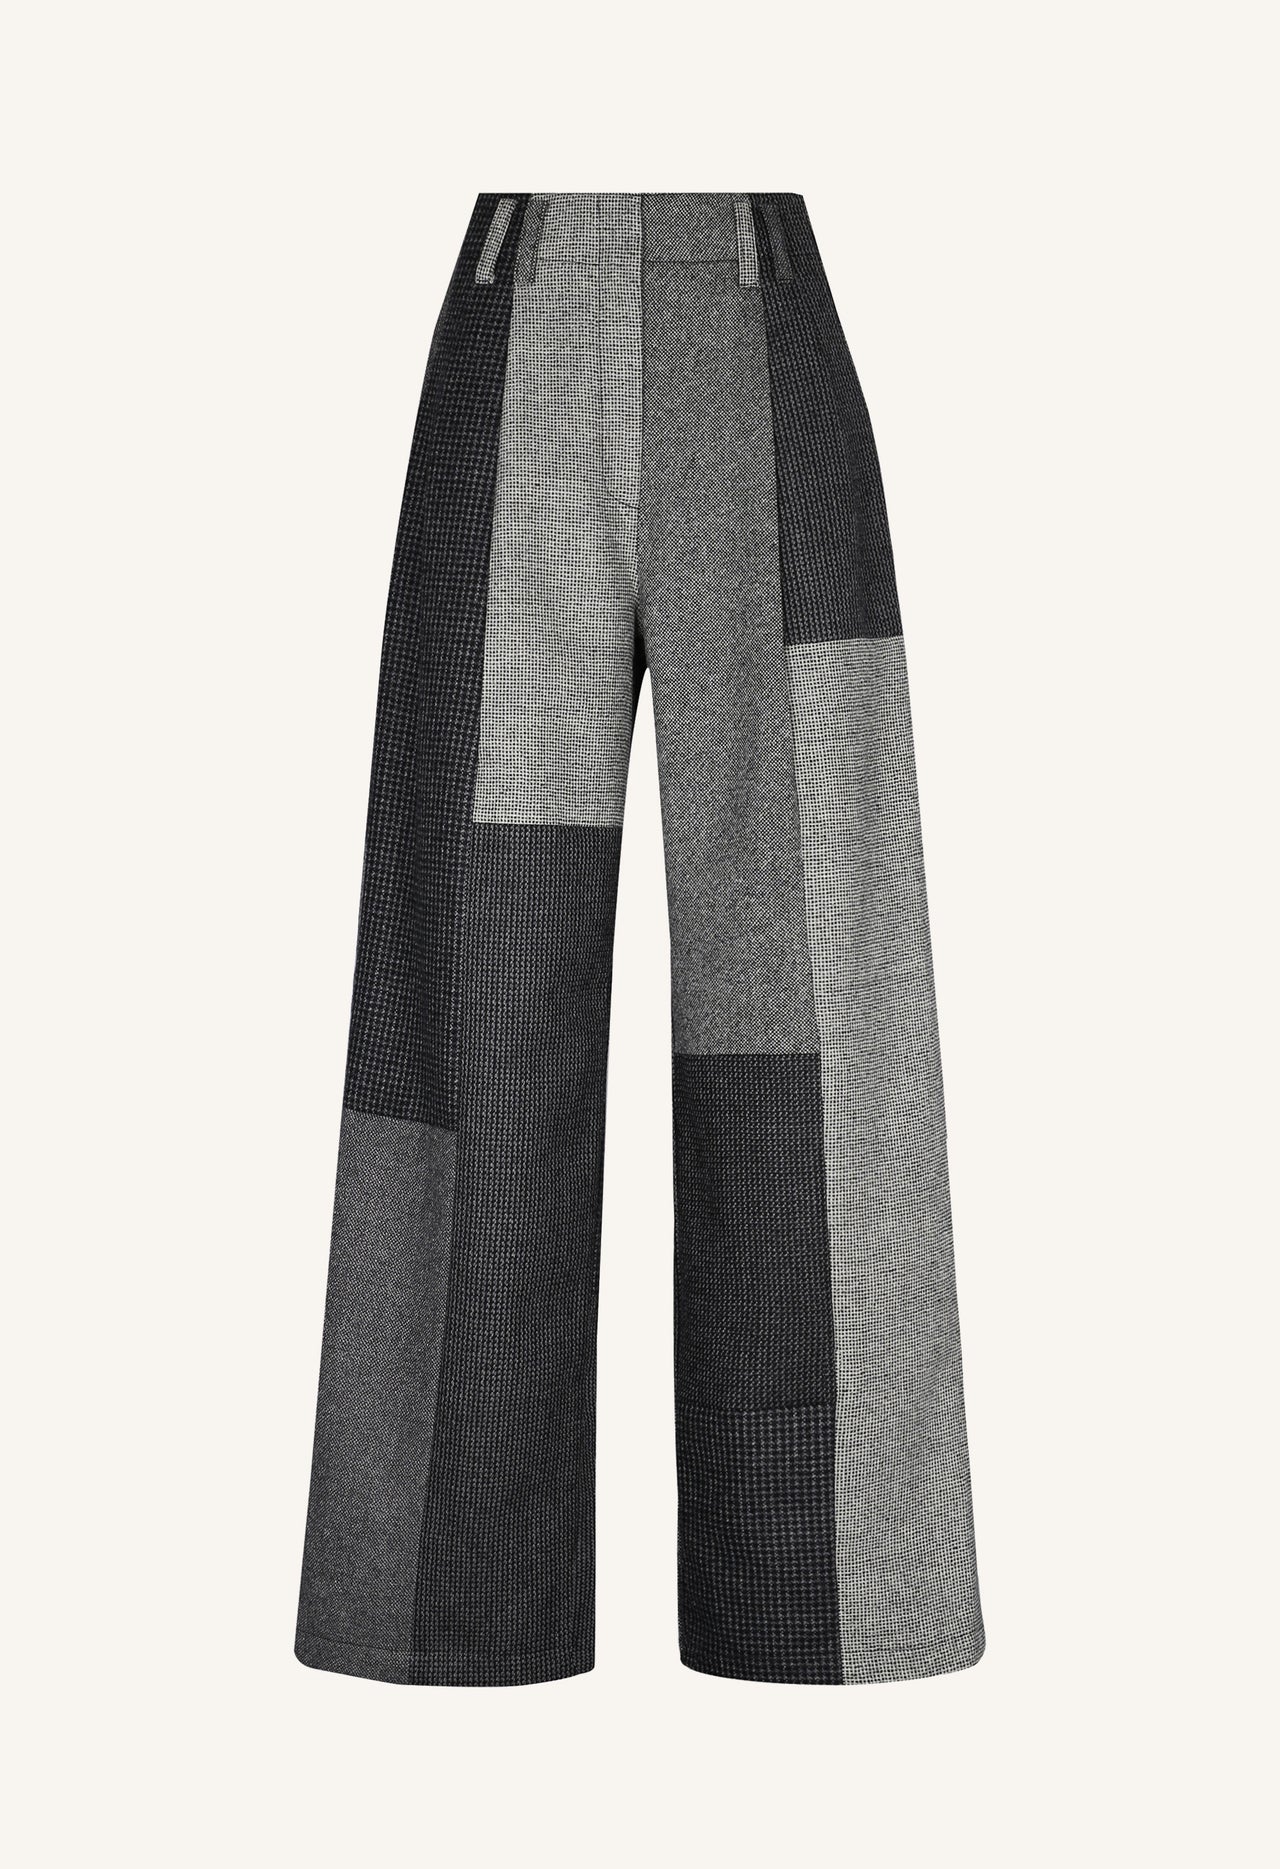 Guadalupe Trousers in Carbón Patchwork Merino Wool